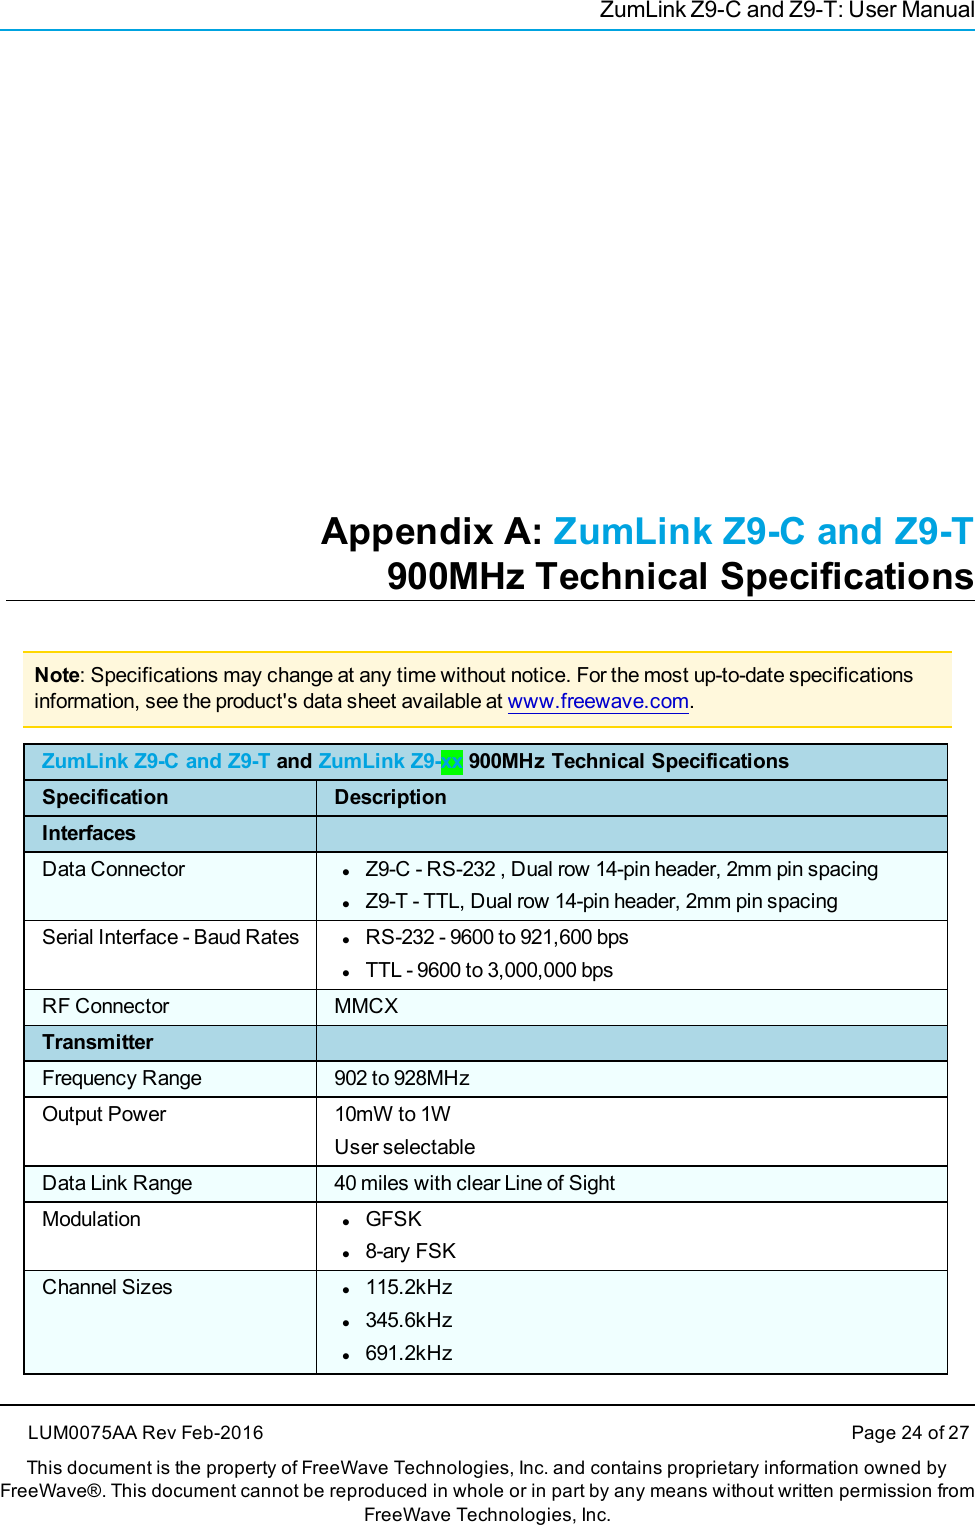 ZumLink Z9-C and Z9-T: User ManualAppendix A: ZumLink Z9-C and Z9-T900MHz Technical SpecificationsNote: Specifications may change at any time without notice. For the most up-to-date specificationsinformation, see the product&apos;s data sheet available at www.freewave.com.ZumLink Z9-C and Z9-T and ZumLink Z9-xx 900MHz Technical SpecificationsSpecification DescriptionInterfacesData Connector lZ9-C - RS-232 , Dual row 14-pin header, 2mm pin spacinglZ9-T - TTL, Dual row 14-pin header, 2mm pin spacingSerial Interface - Baud Rates lRS-232 - 9600 to 921,600 bpslTTL - 9600 to 3,000,000 bpsRF Connector MMCXTransmitterFrequency Range 902 to 928MHzOutput Power 10mW to 1WUser selectableData Link Range 40 miles with clear Line of SightModulation lGFSKl8-ary FSKChannel Sizes l115.2kHzl345.6kHzl691.2kHzLUM0075AA Rev Feb-2016 Page 24 of 27This document is the property of FreeWave Technologies, Inc. and contains proprietary information owned byFreeWave®. This document cannot be reproduced in whole or in part by any means without written permission fromFreeWave Technologies, Inc.